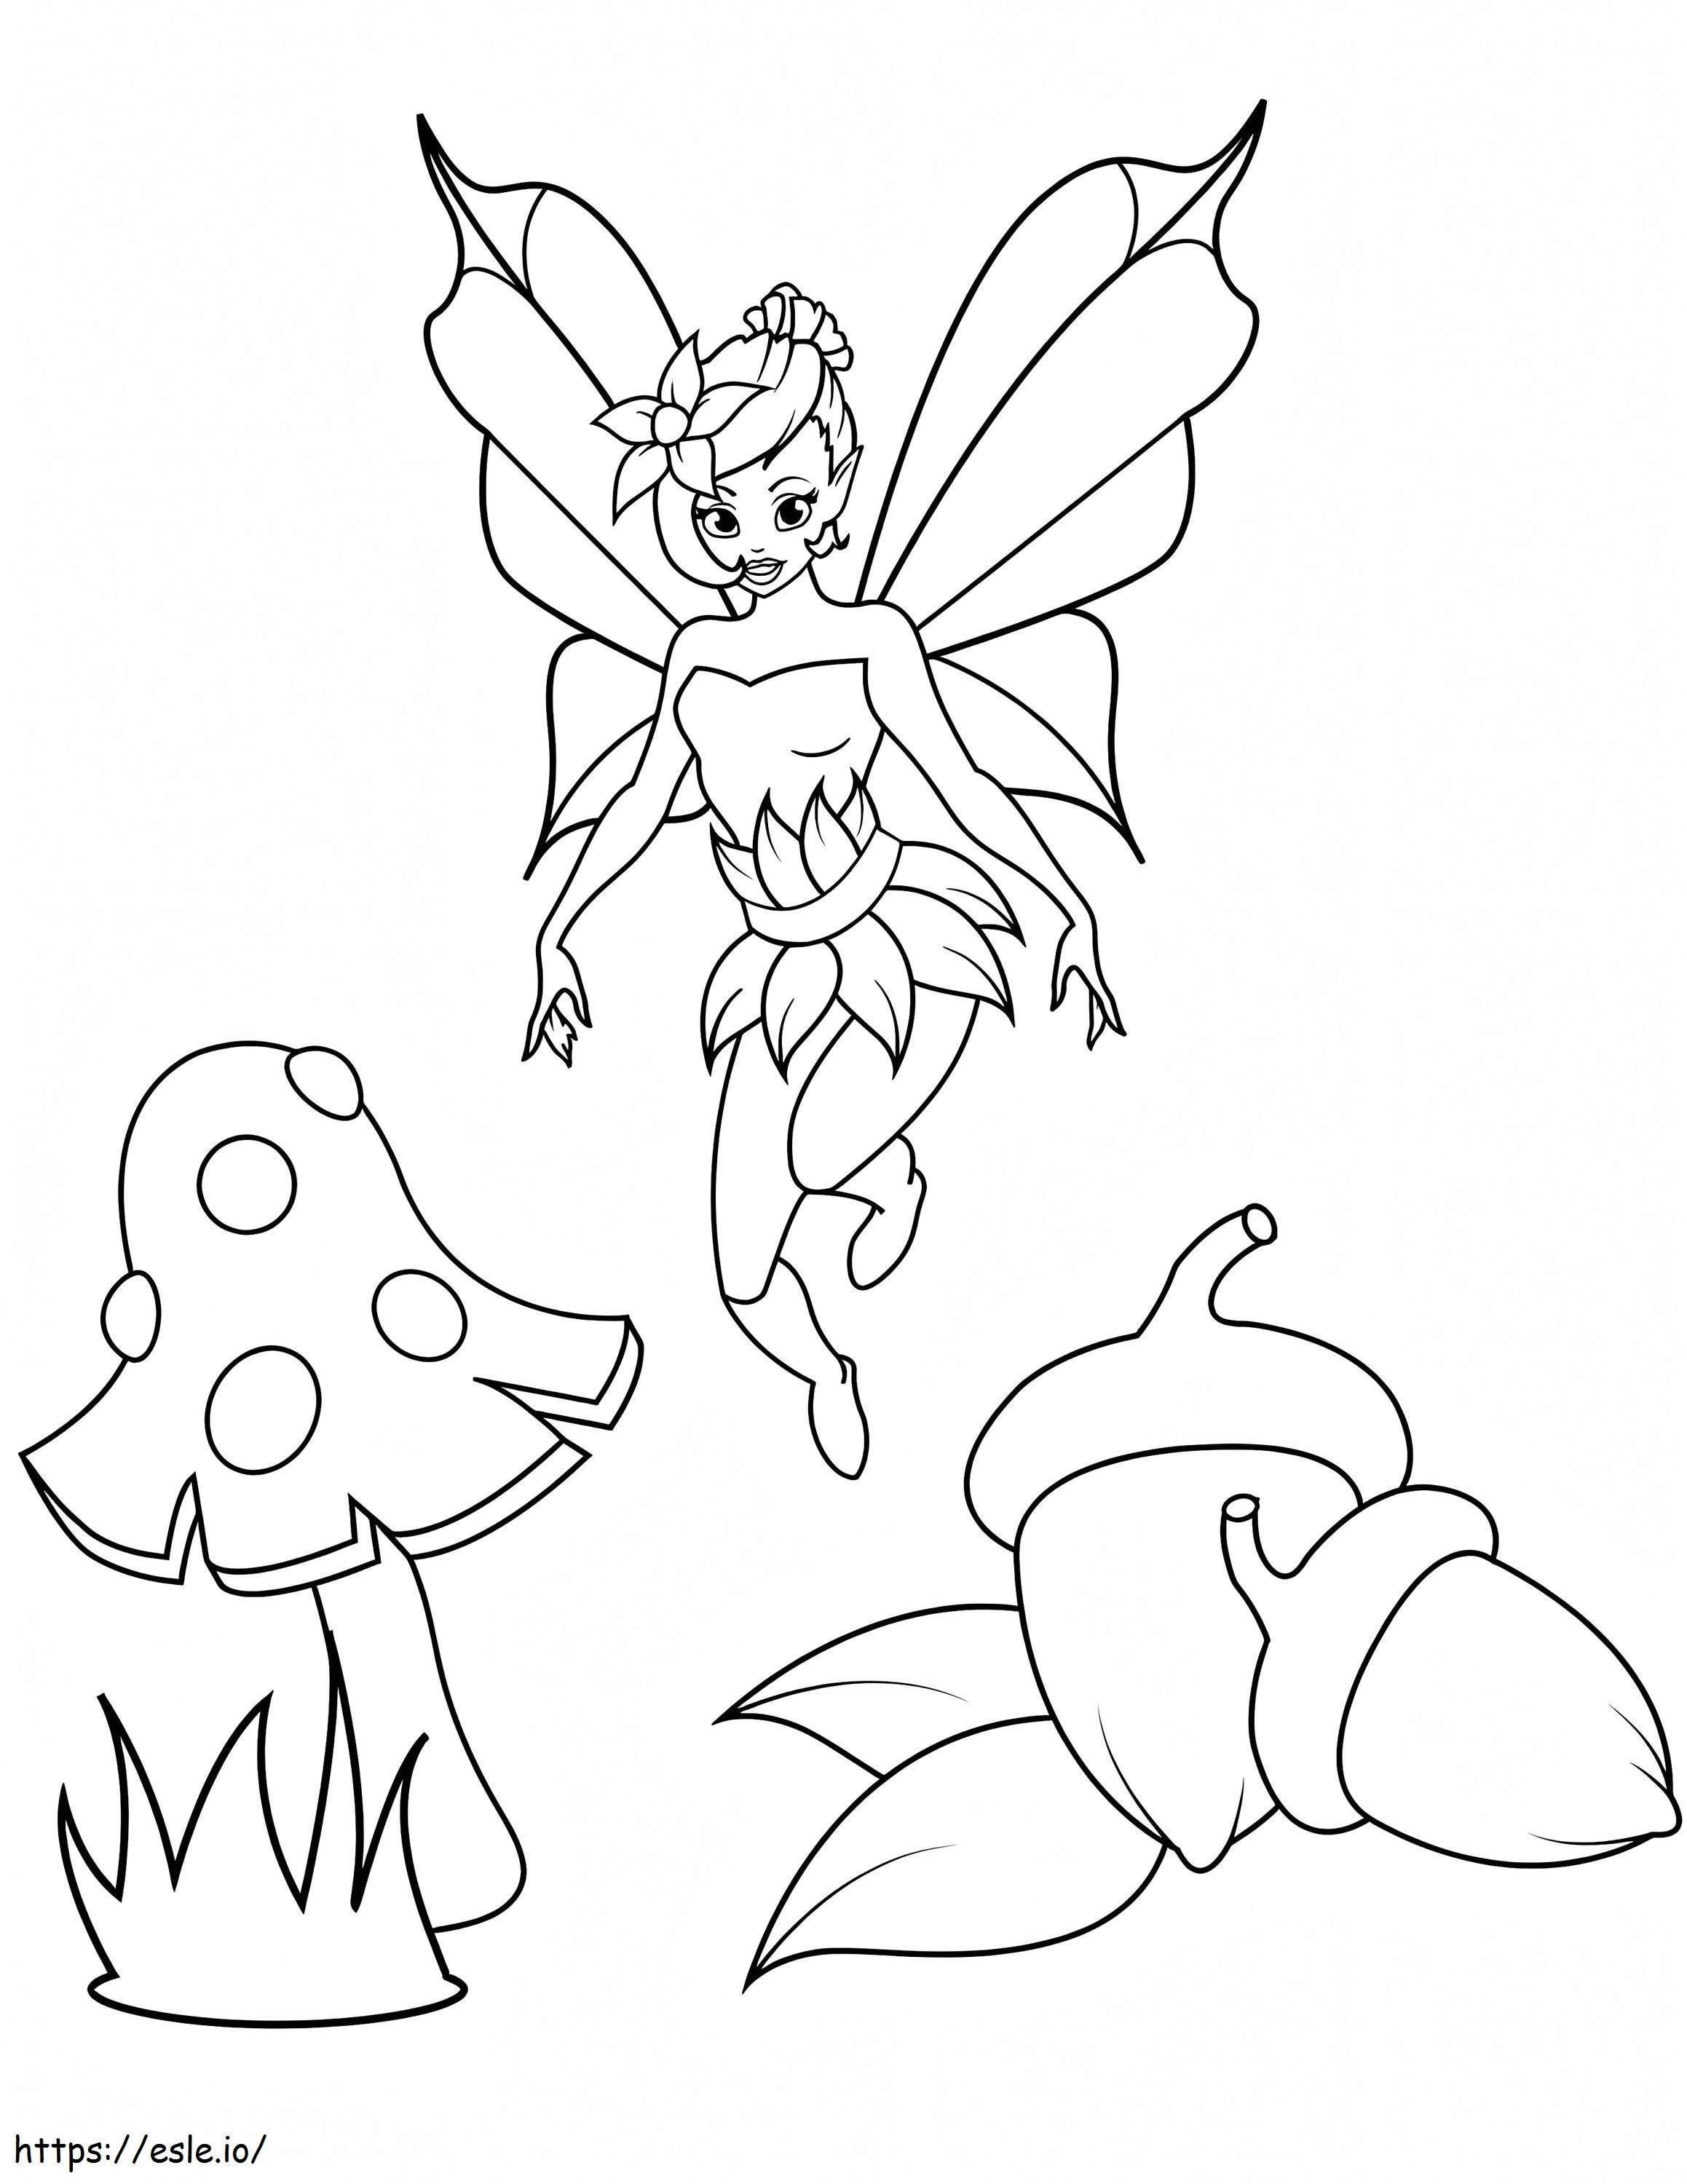 Fairy With Acorns And Mushroom coloring page